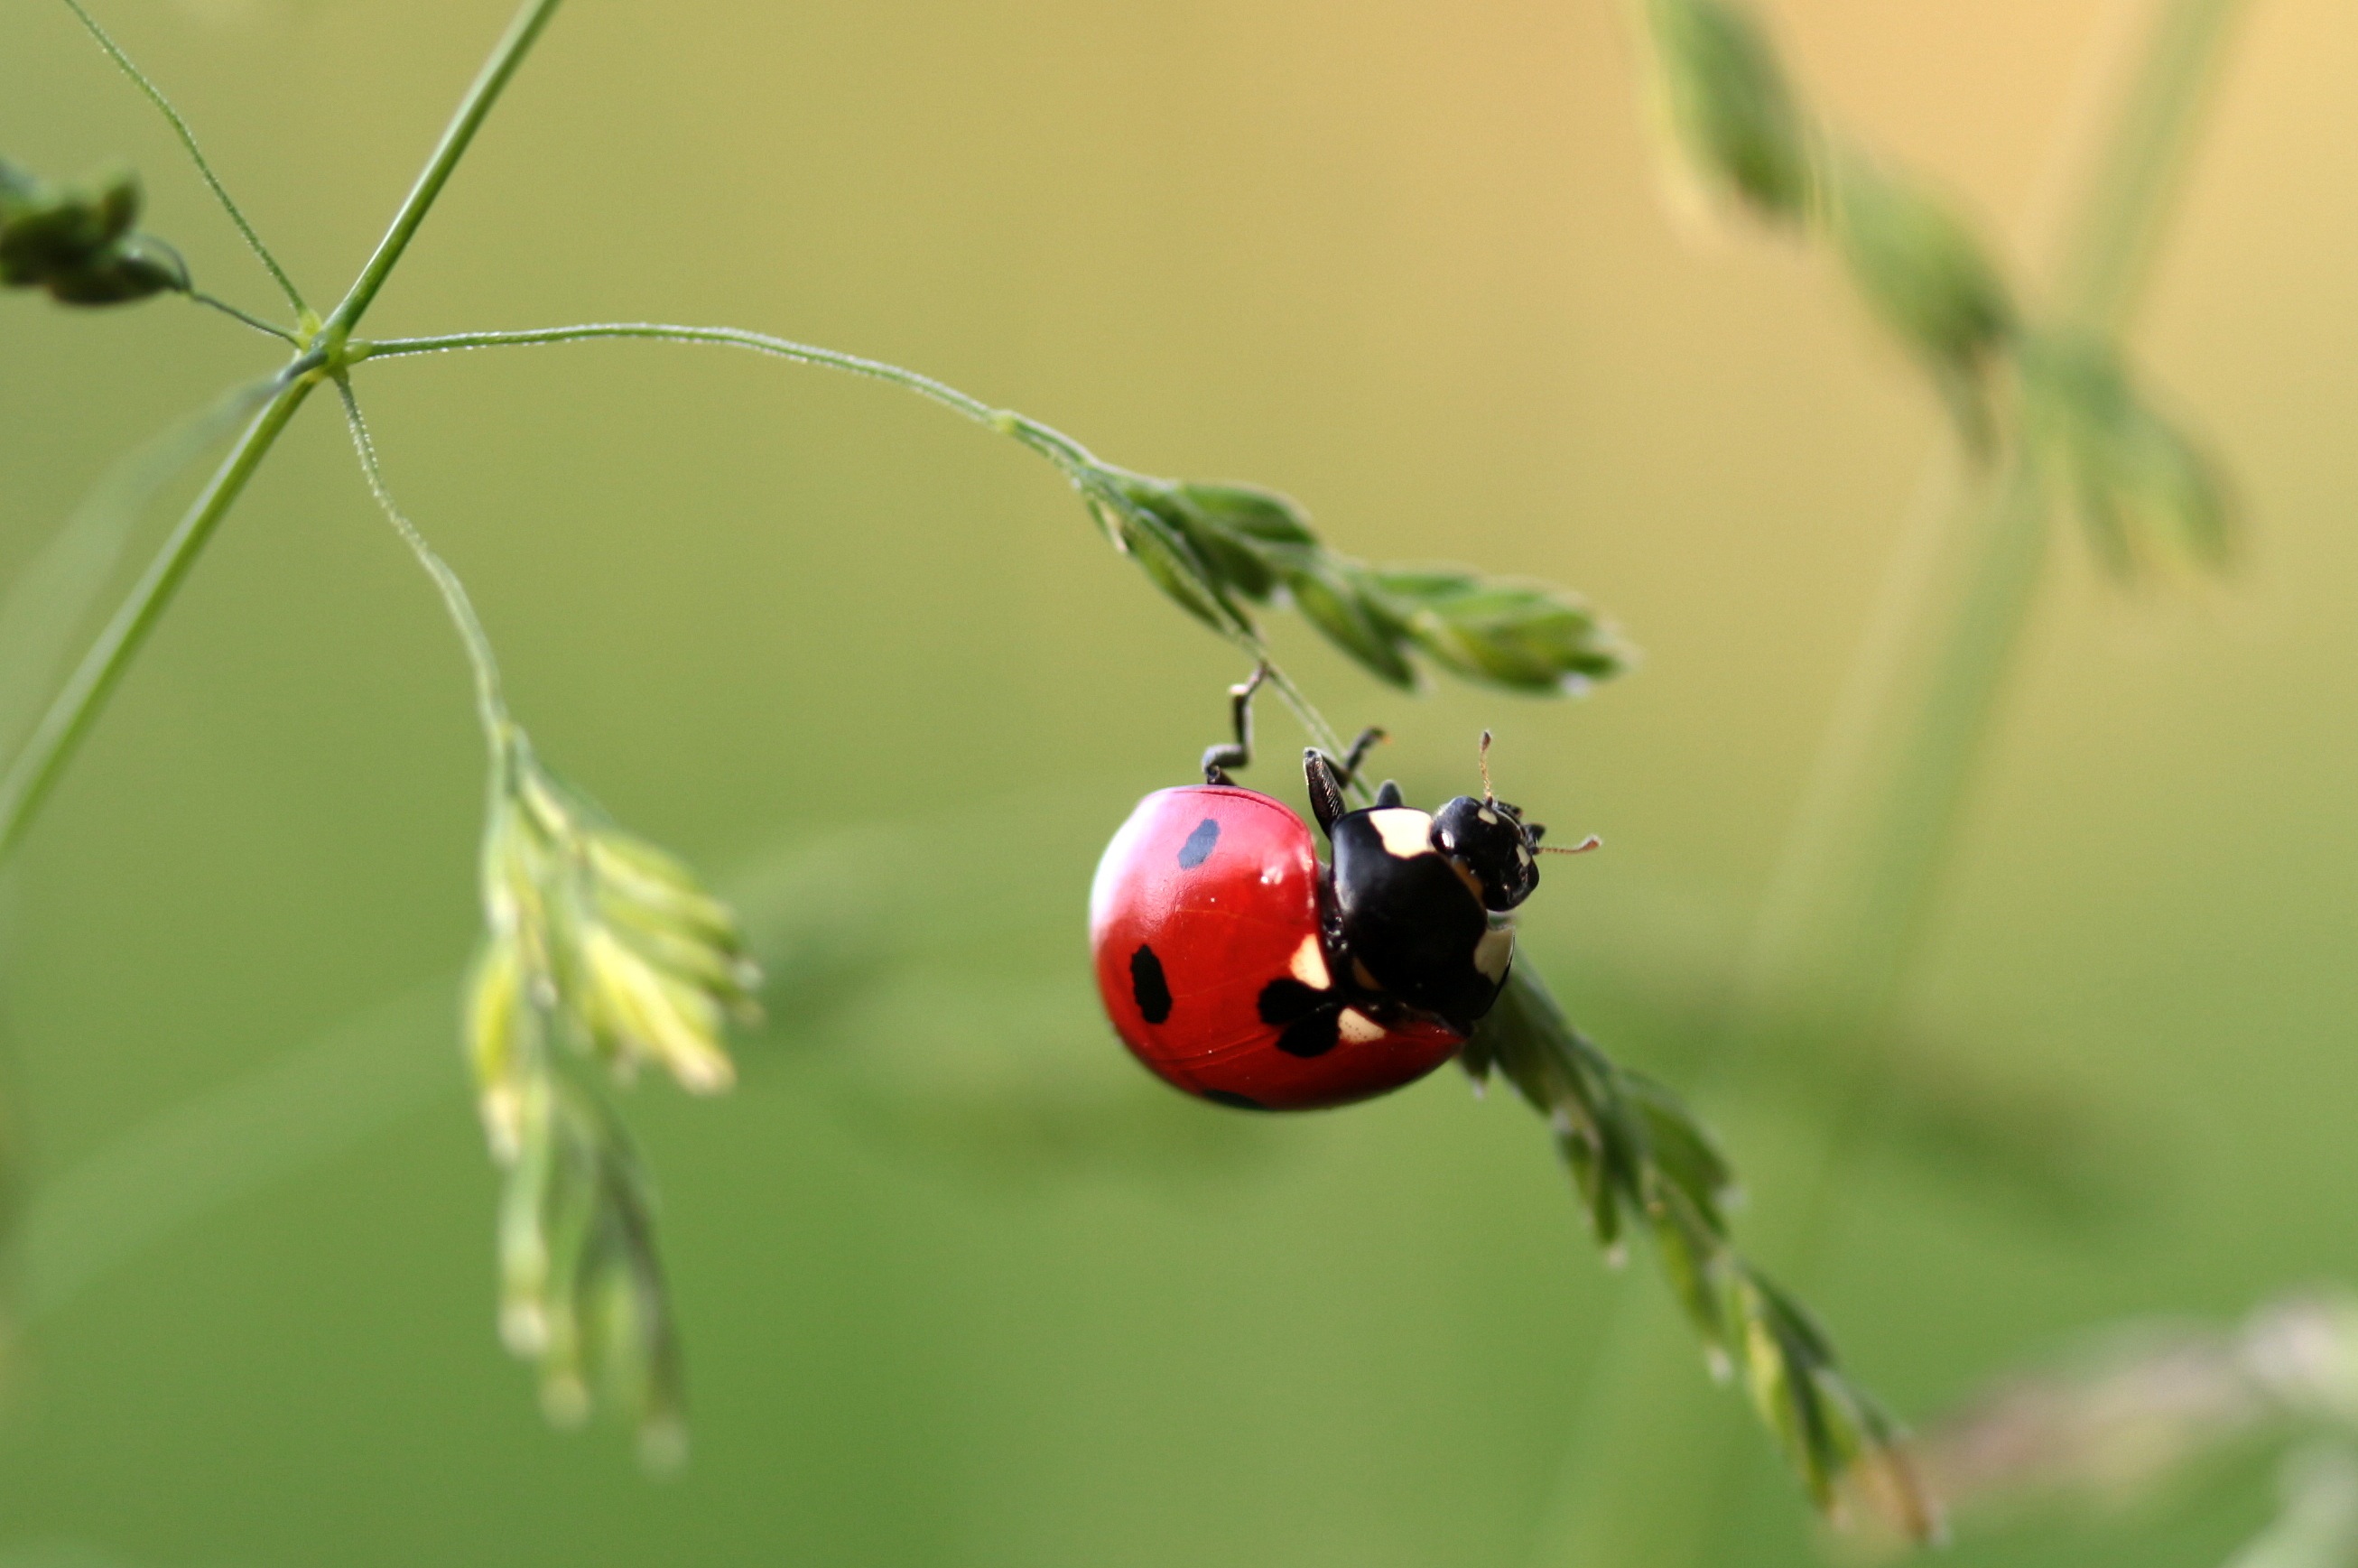 68383 download wallpaper grass, macro, insect, ladybug, ladybird screensavers and pictures for free